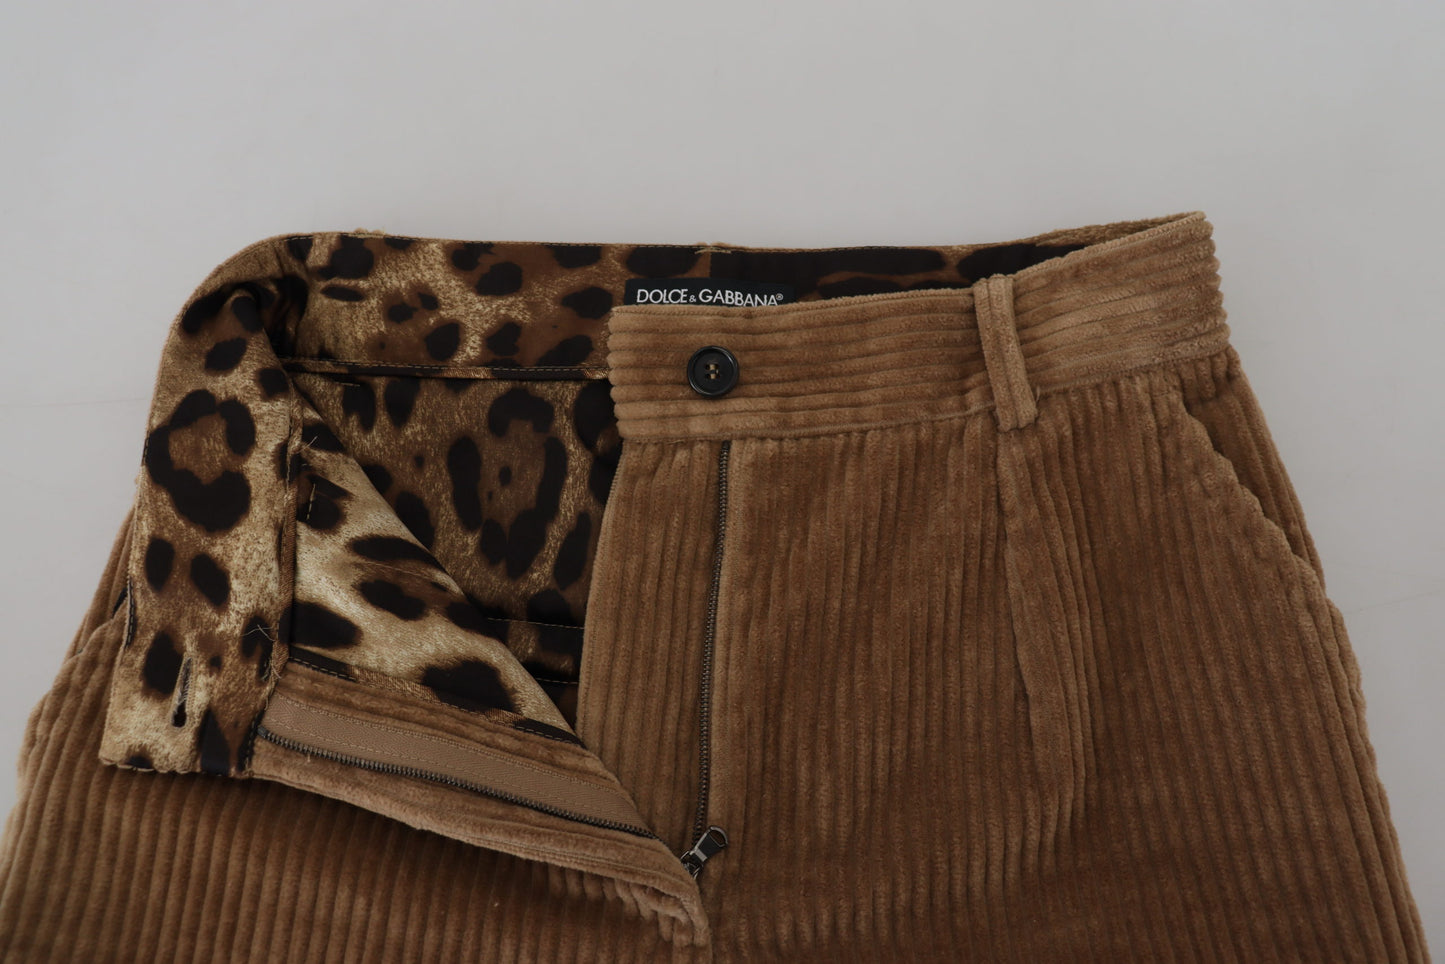 Elegant Brown Corduroy Pants for Sophisticated Style